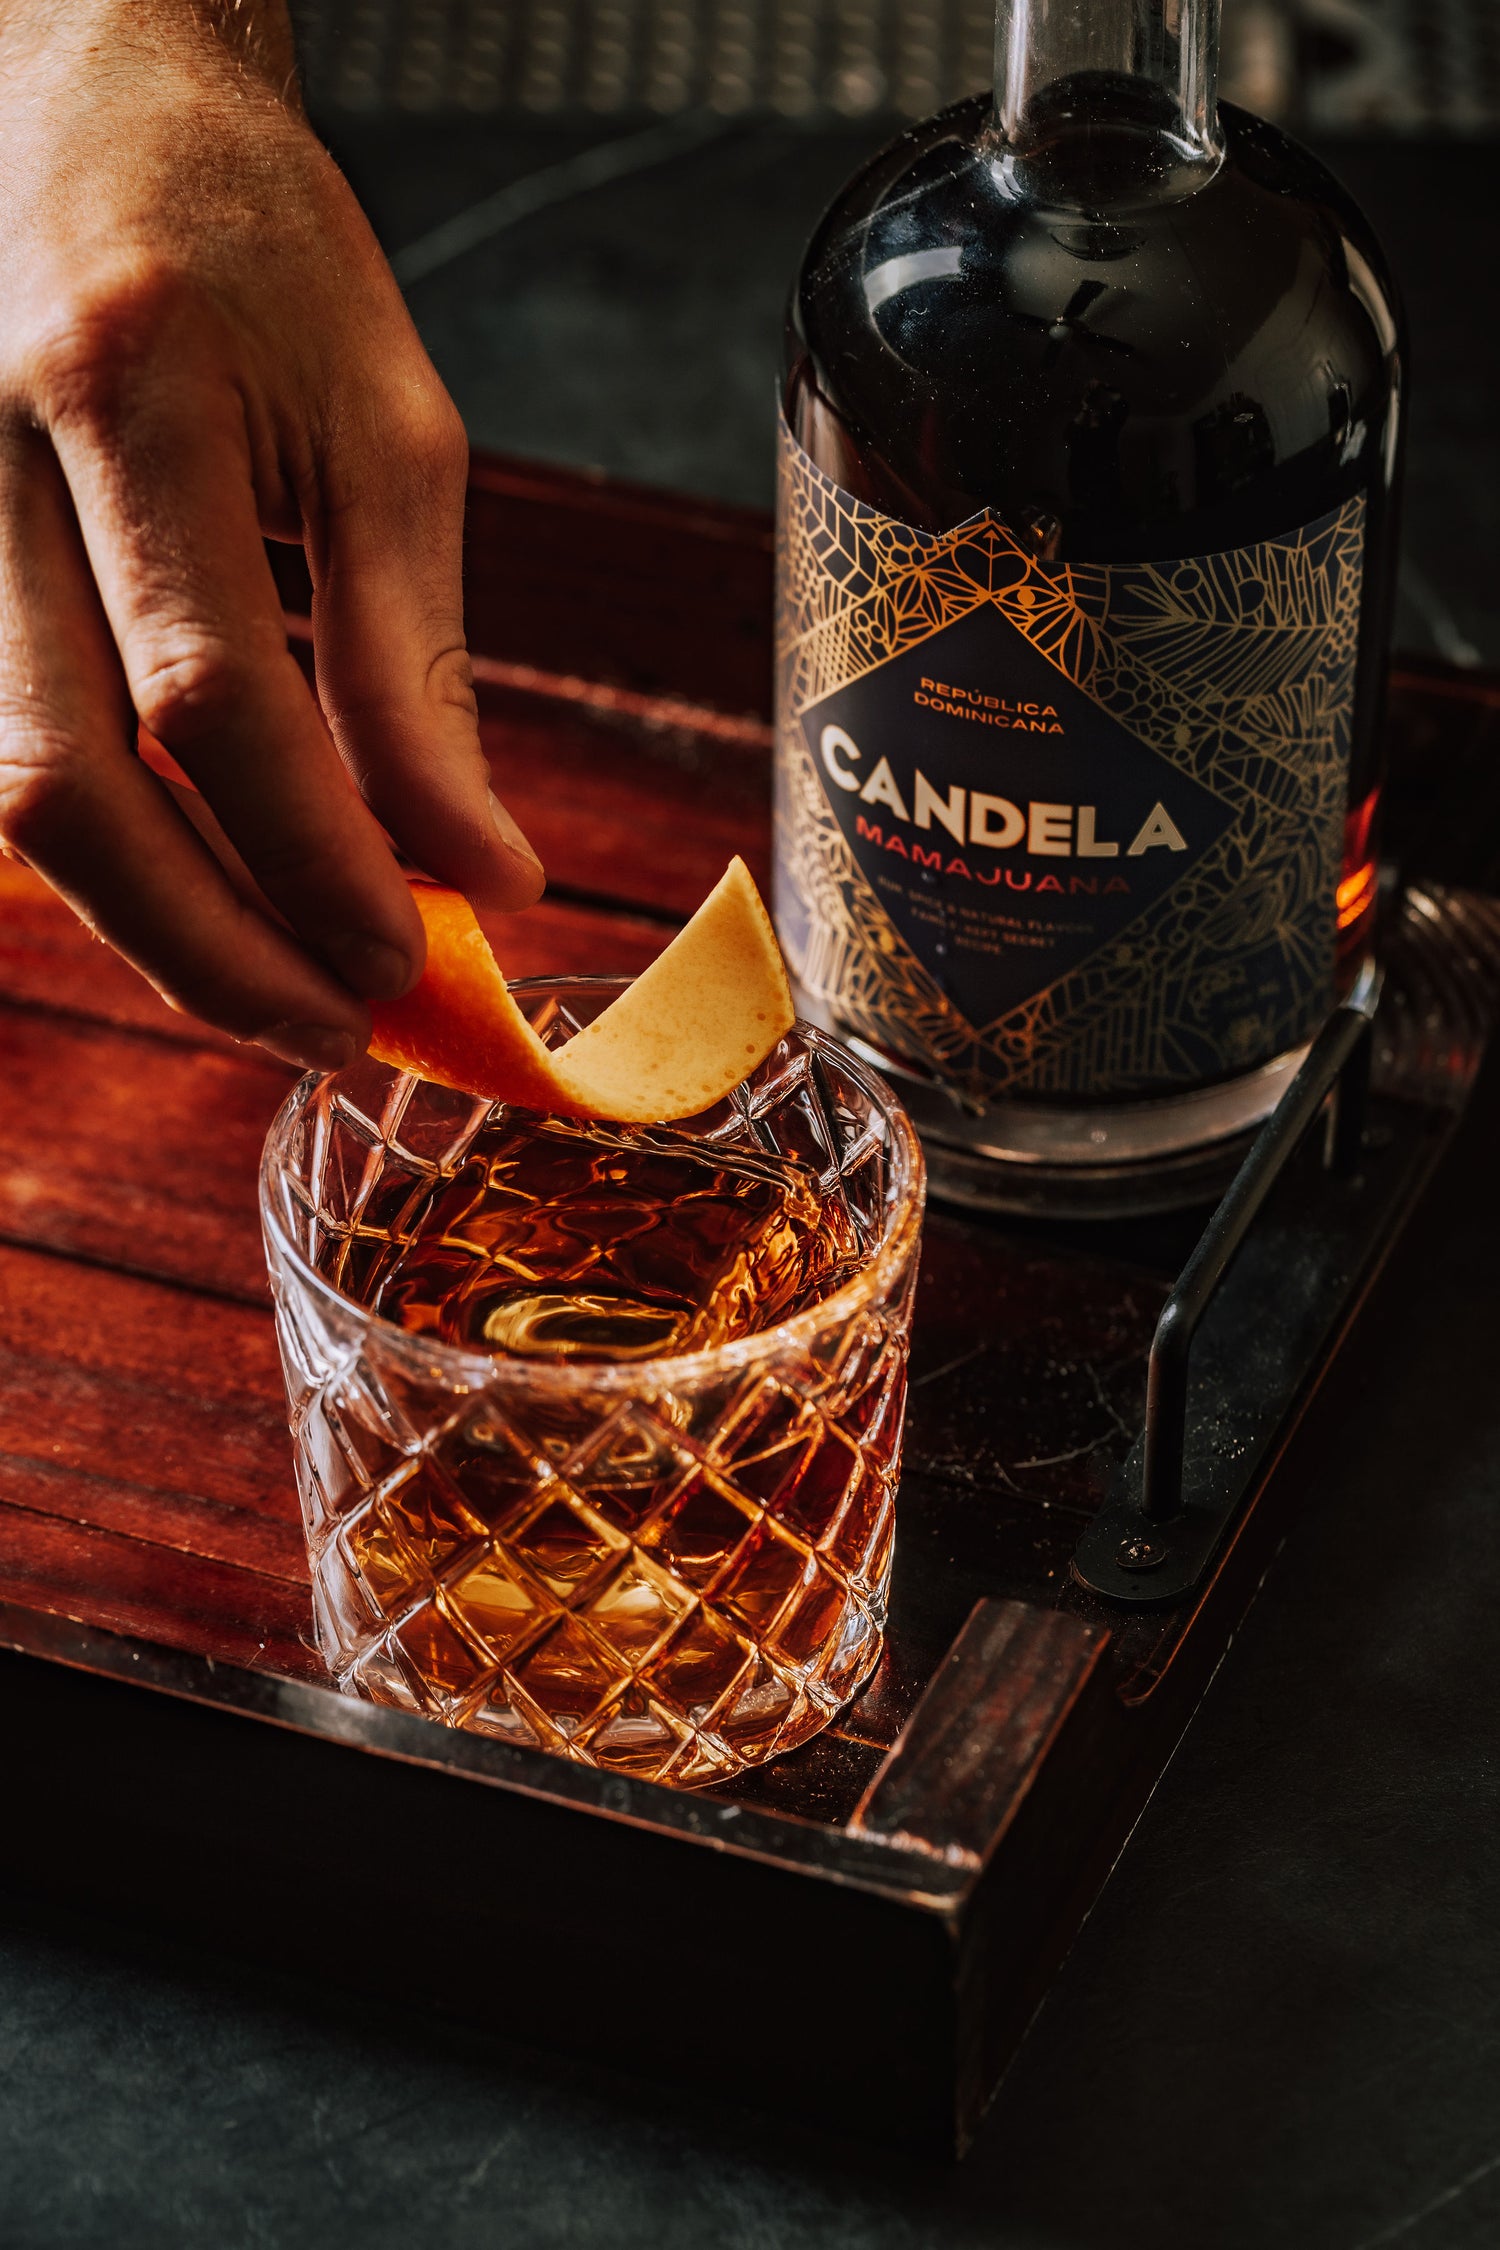 Candela presented in it's signature serve: on the rocks with an orange twist.